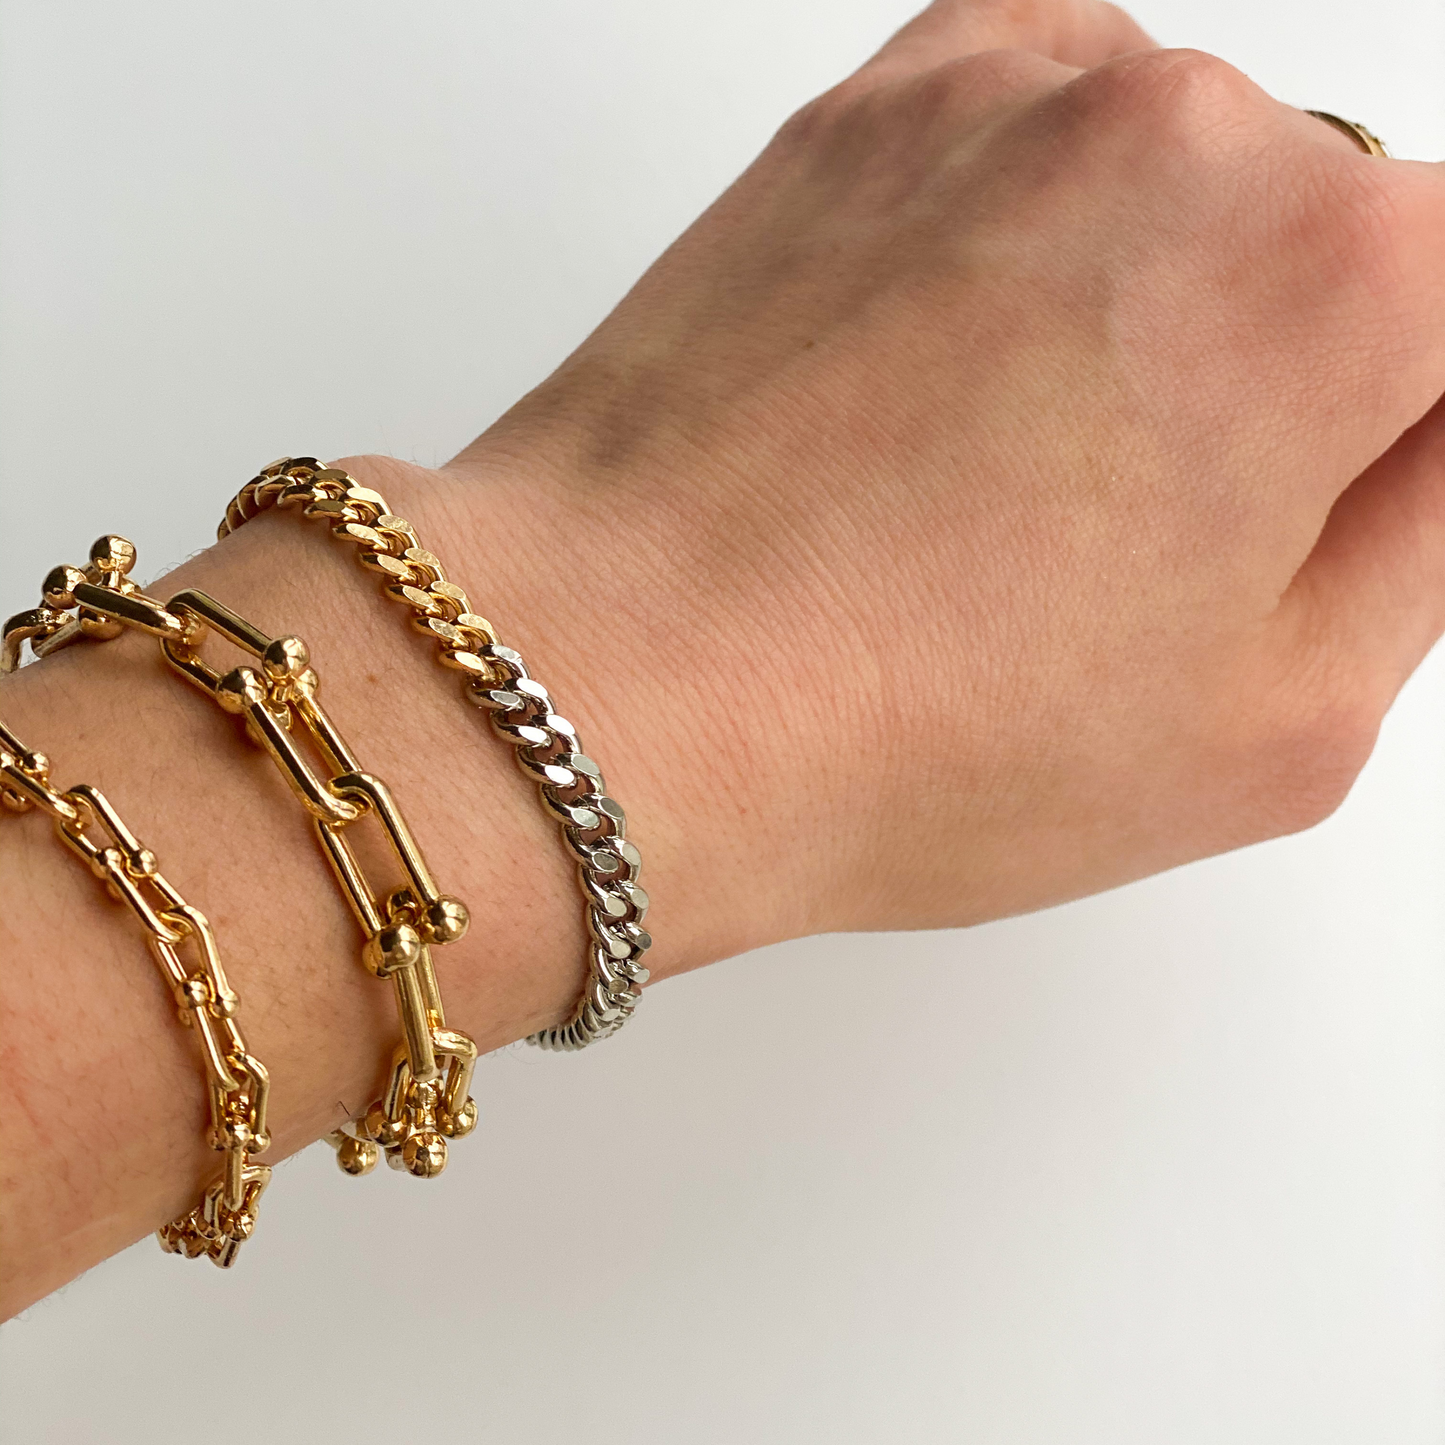 two-tone gold and silver curb chain bracelet and two gold u link chain bracelets